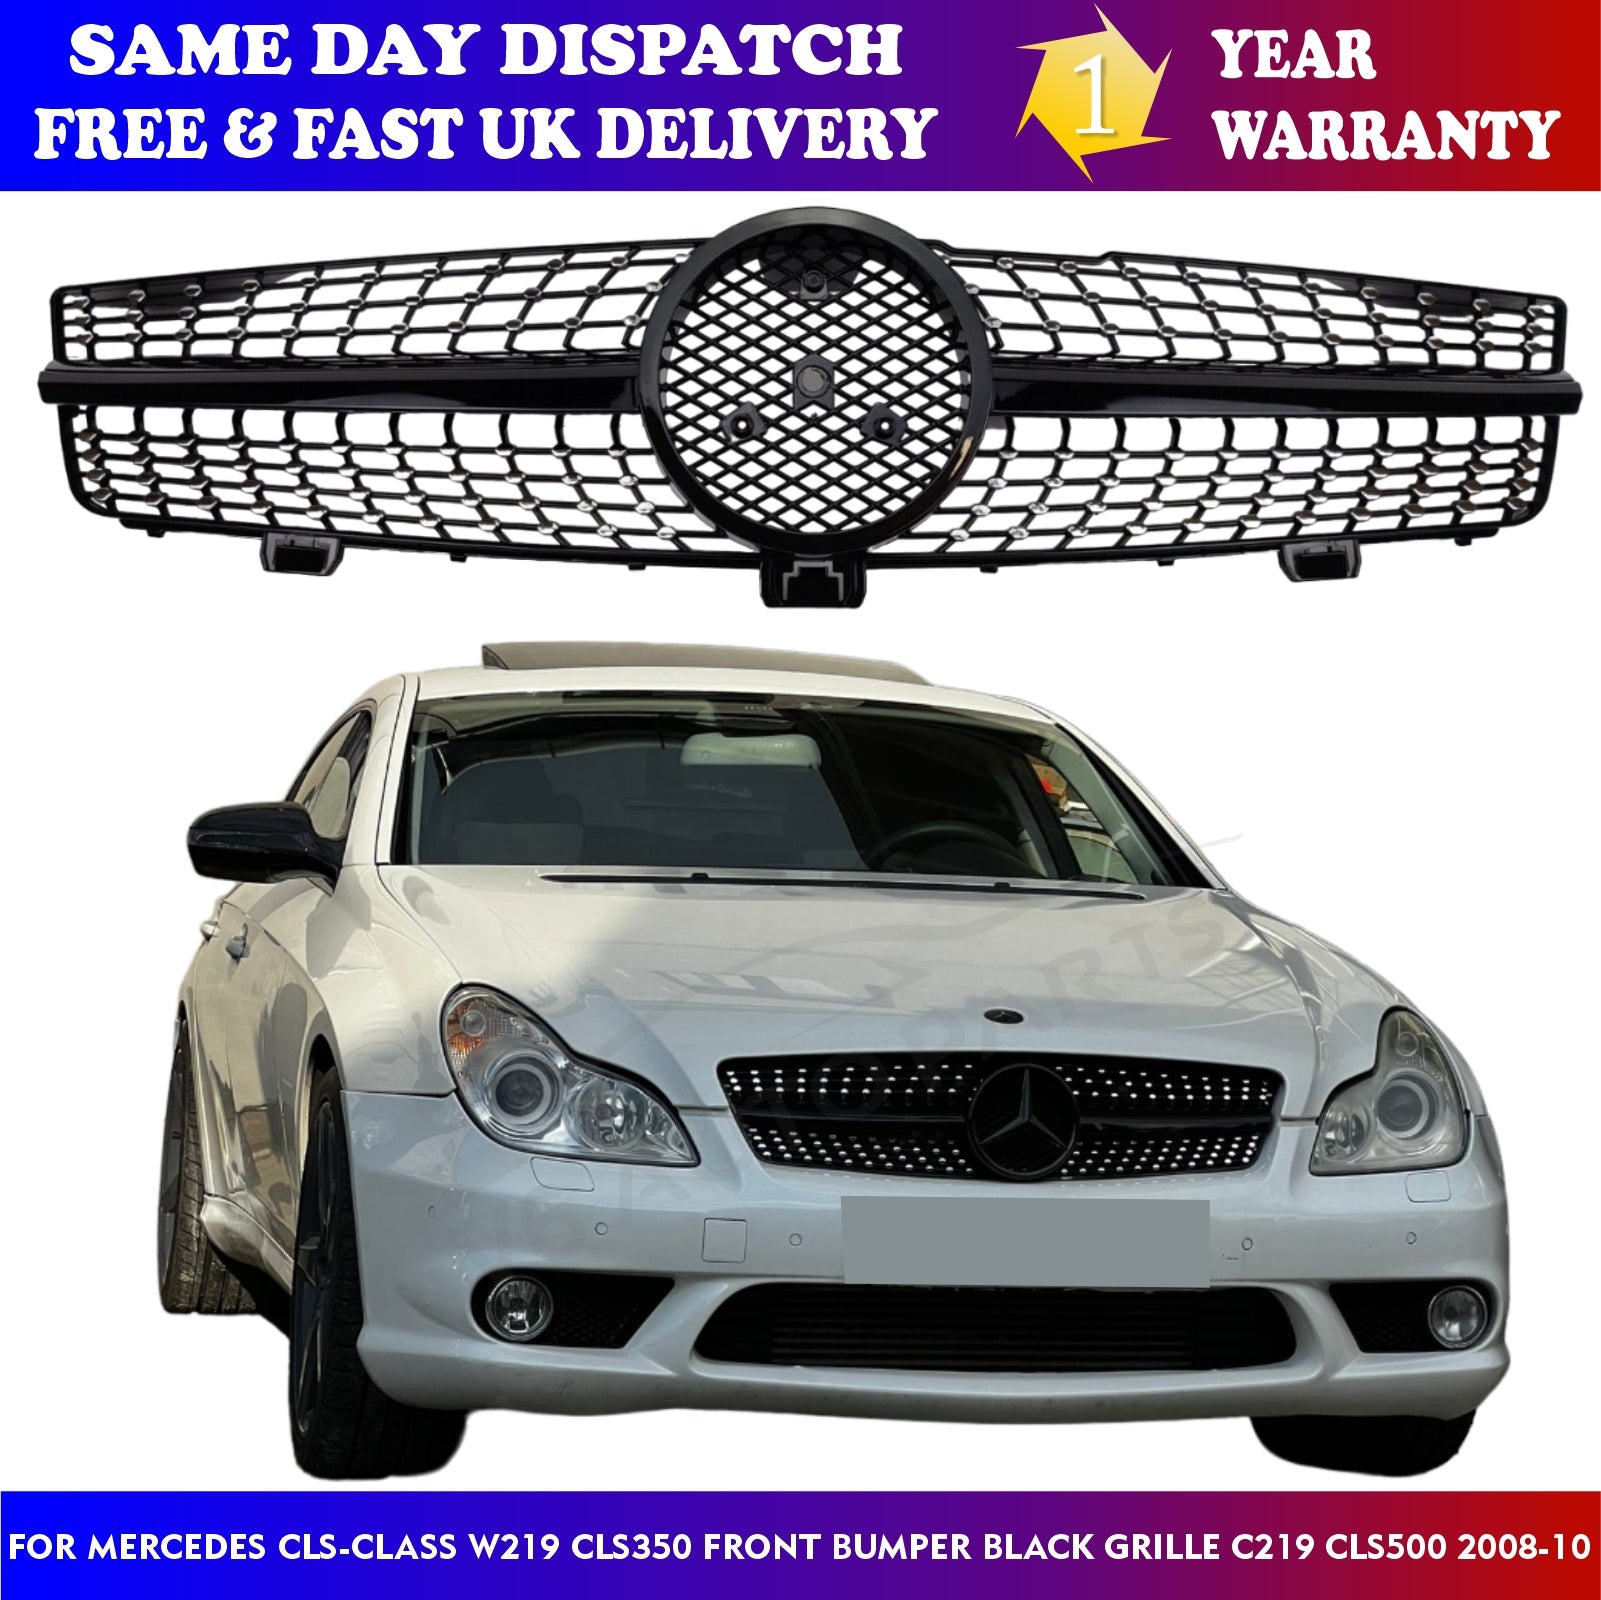 For Mercedes CLS-Class W219 C219 CLS500 CLS55 AMG Front Radiator Grille 2008-10